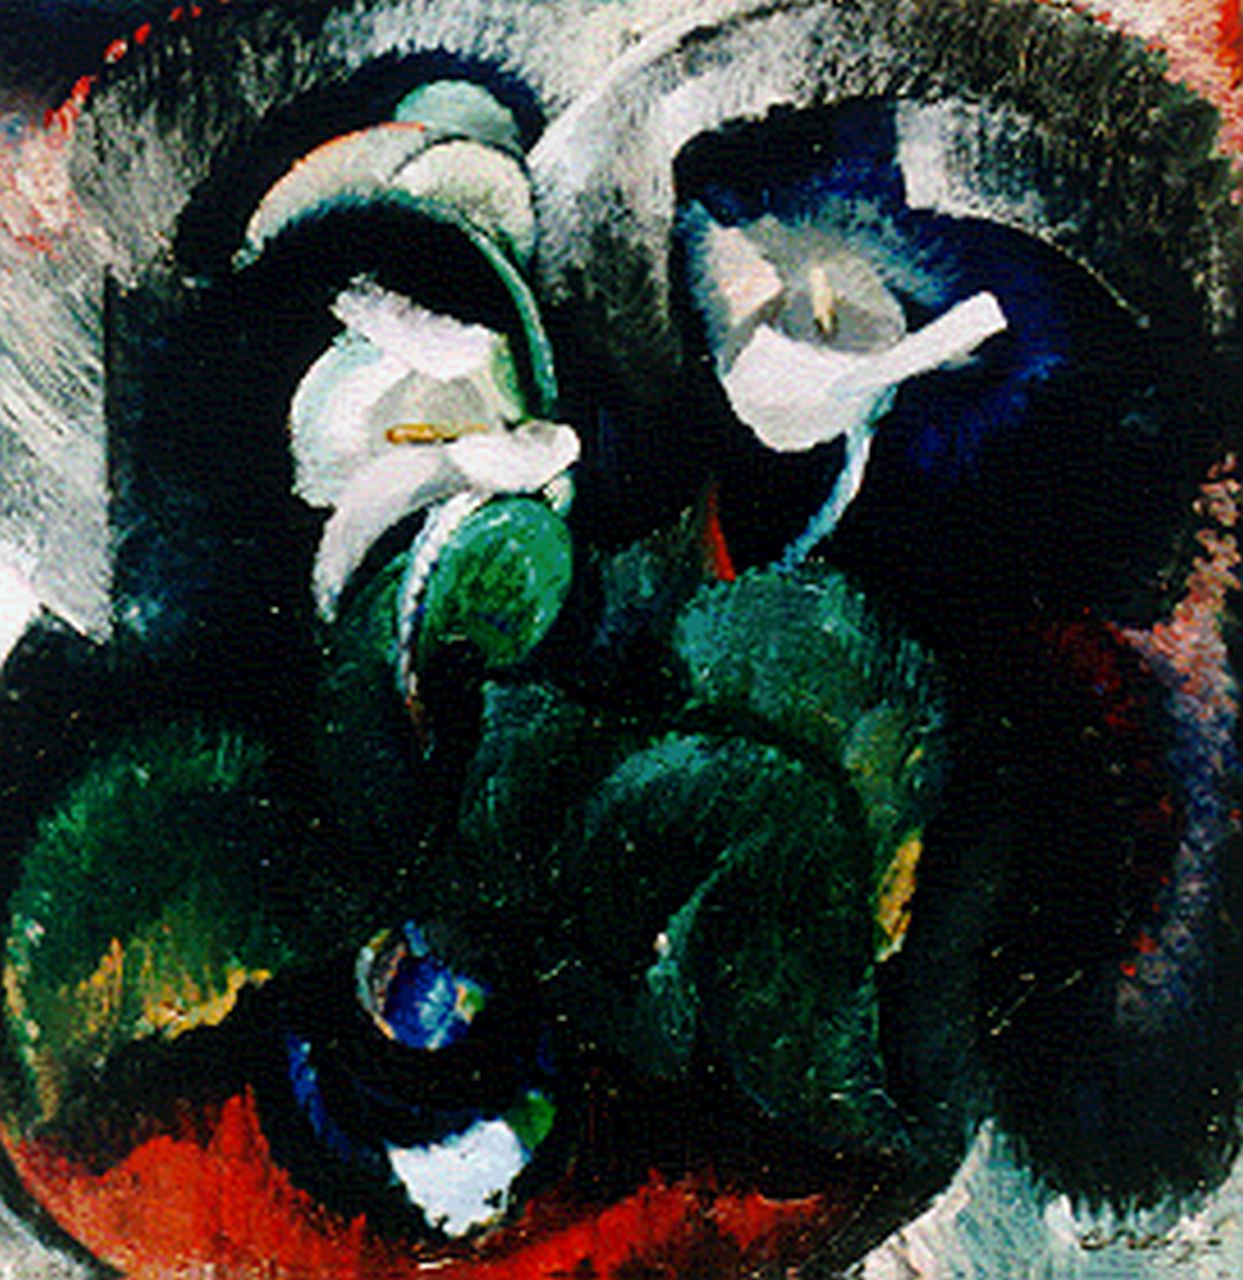 Berg E.  | Else Berg, Arums in a vase, oil on canvas 78.0 x 76.0 cm, signed l.r. and painted 1917